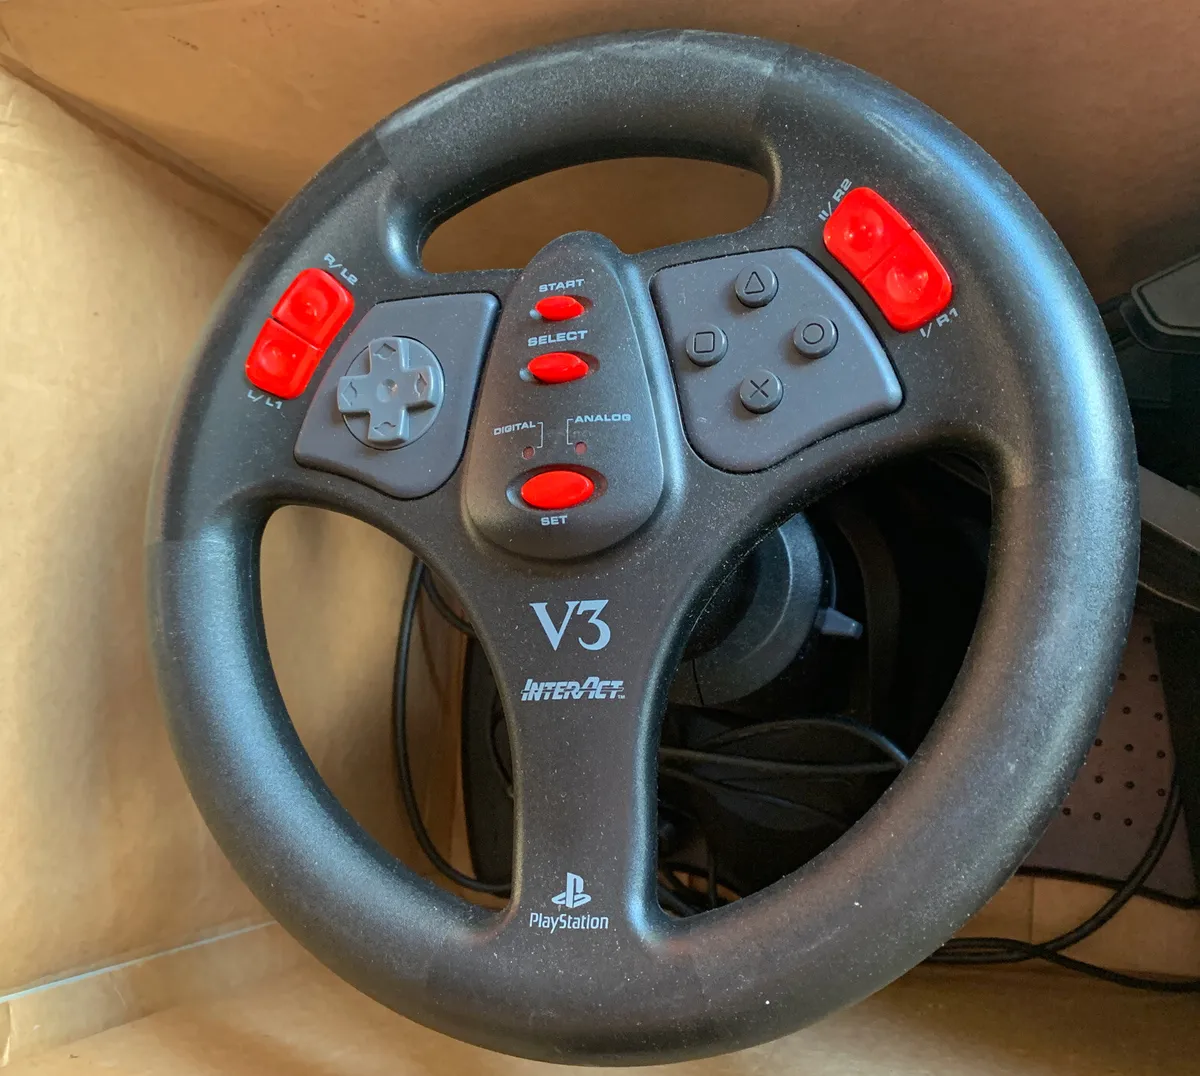 Which Game Is Compatible With V3 Racing Wheel For PlayStation